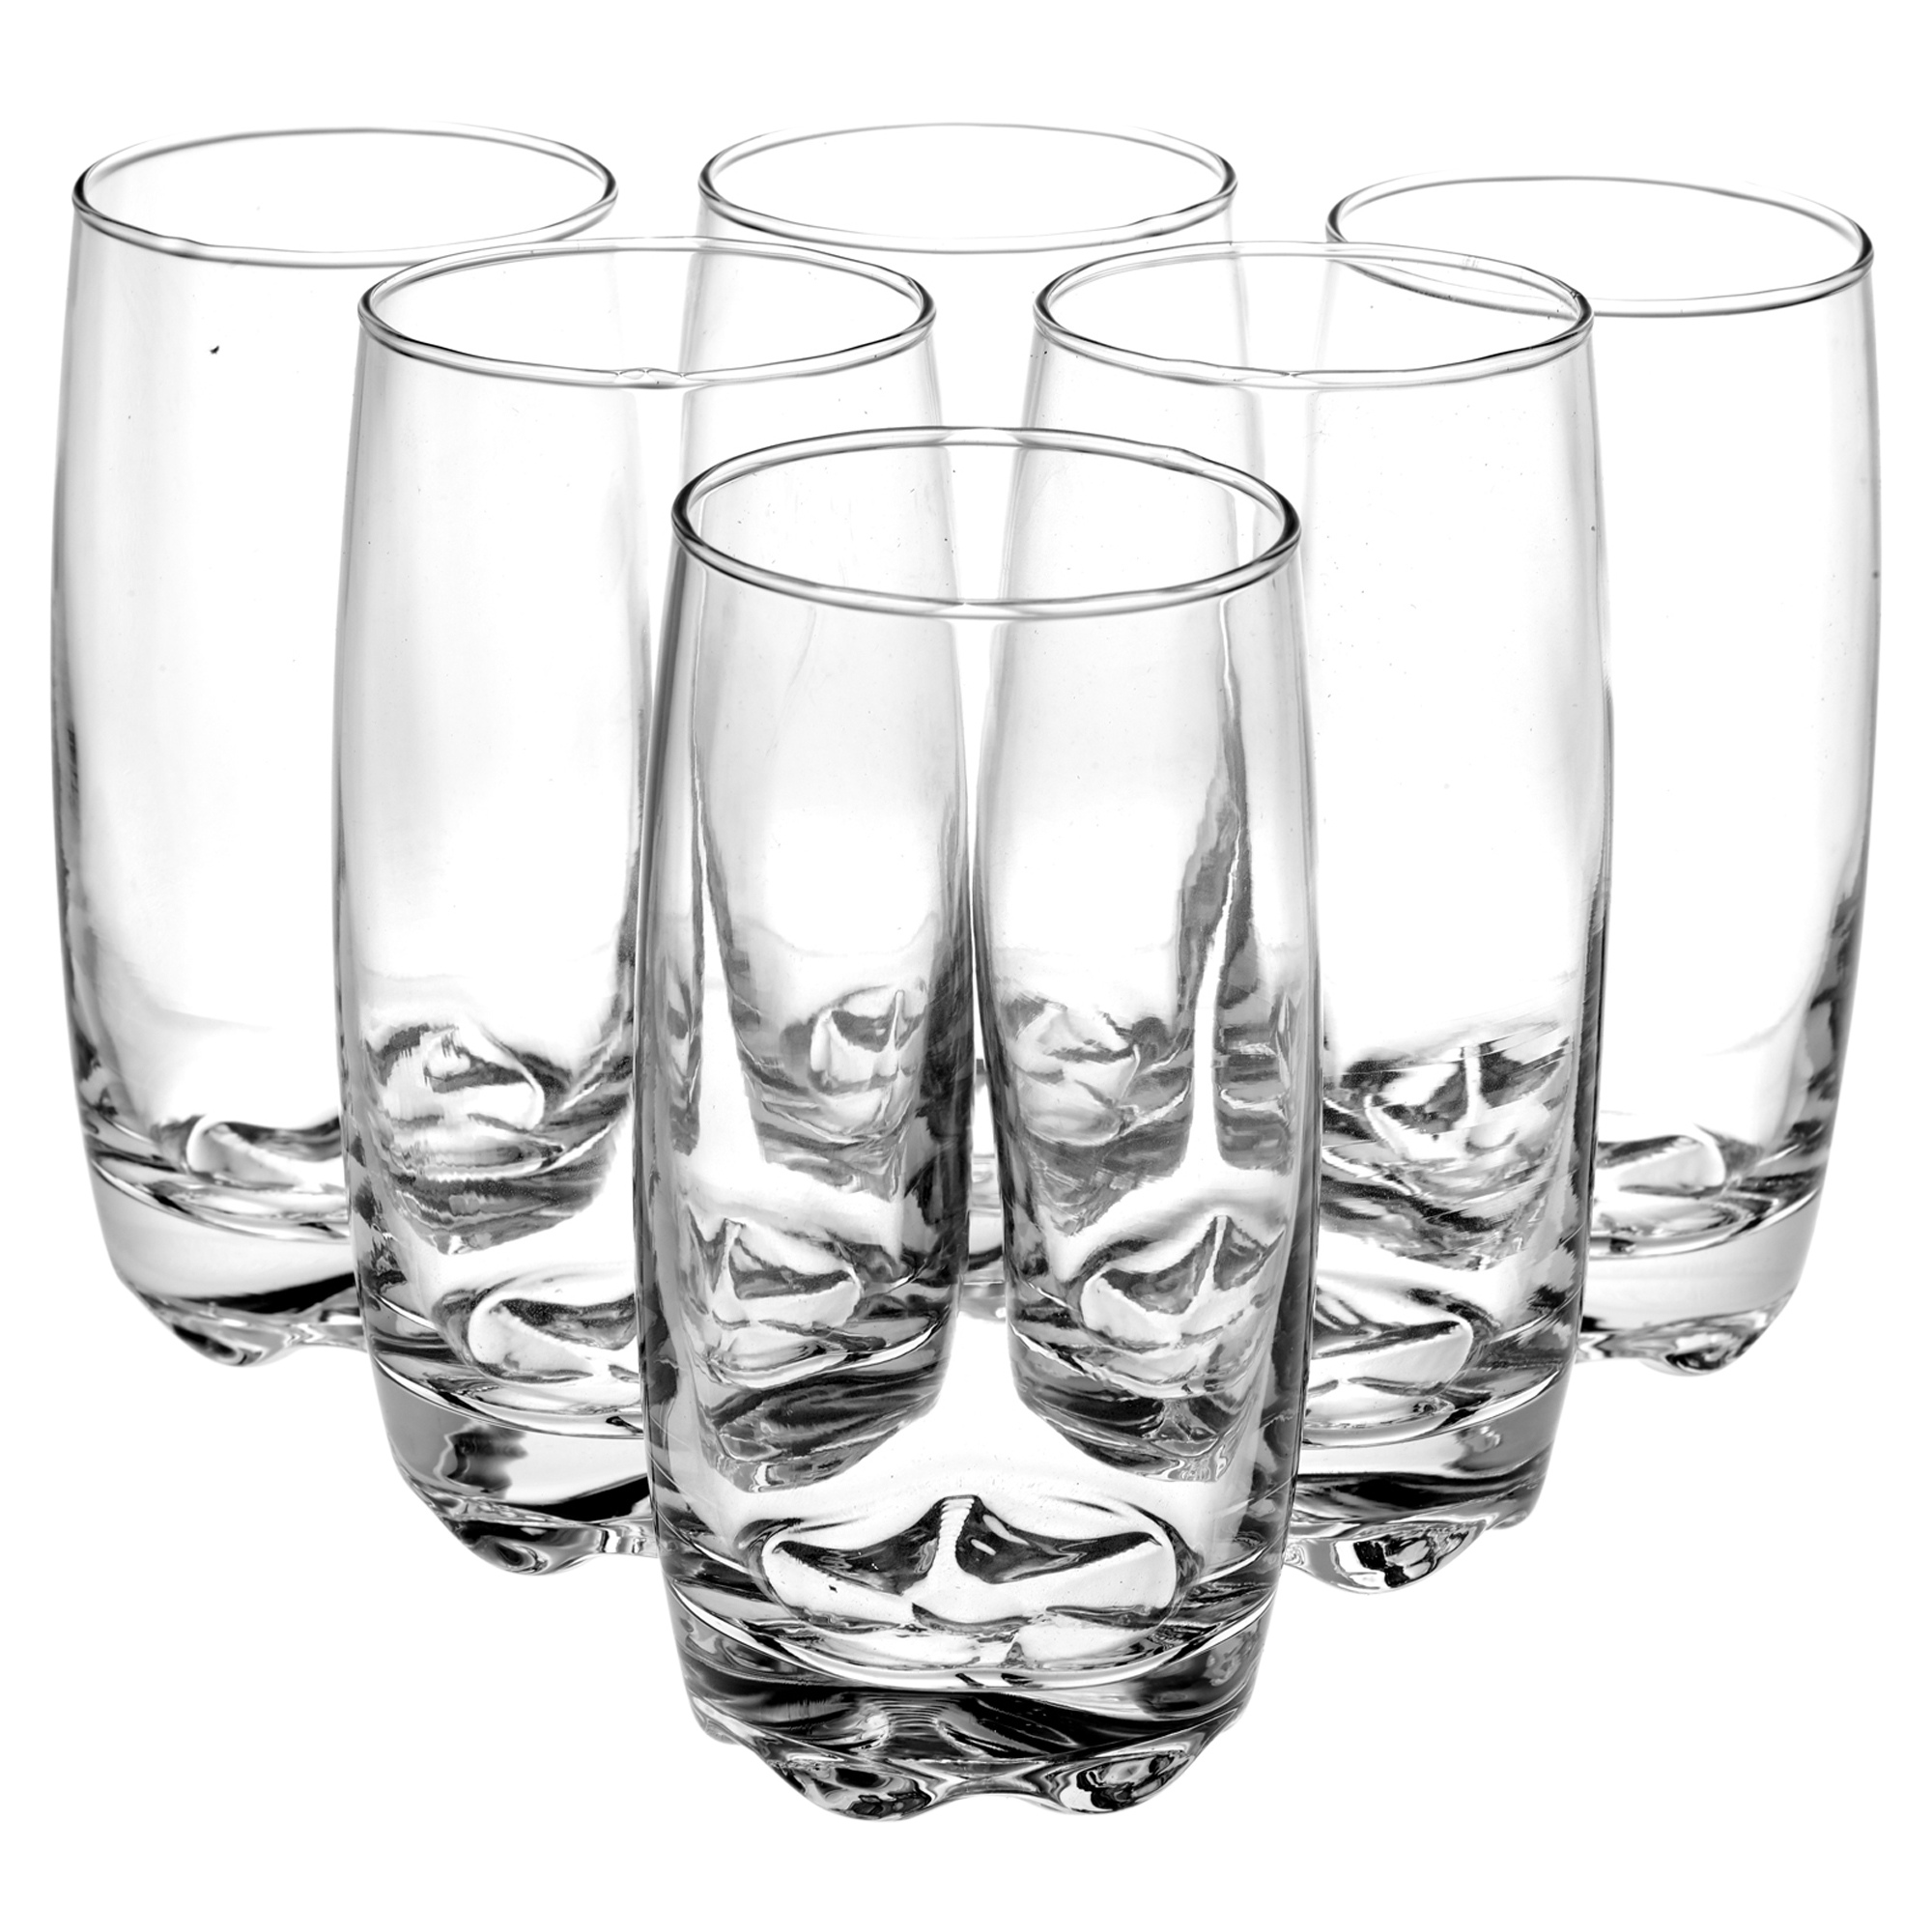 6 Pcs 375ml Drinking Glasses Set Cups With Thick Base For Juice Water Cocktail 8719202185911 Ebay